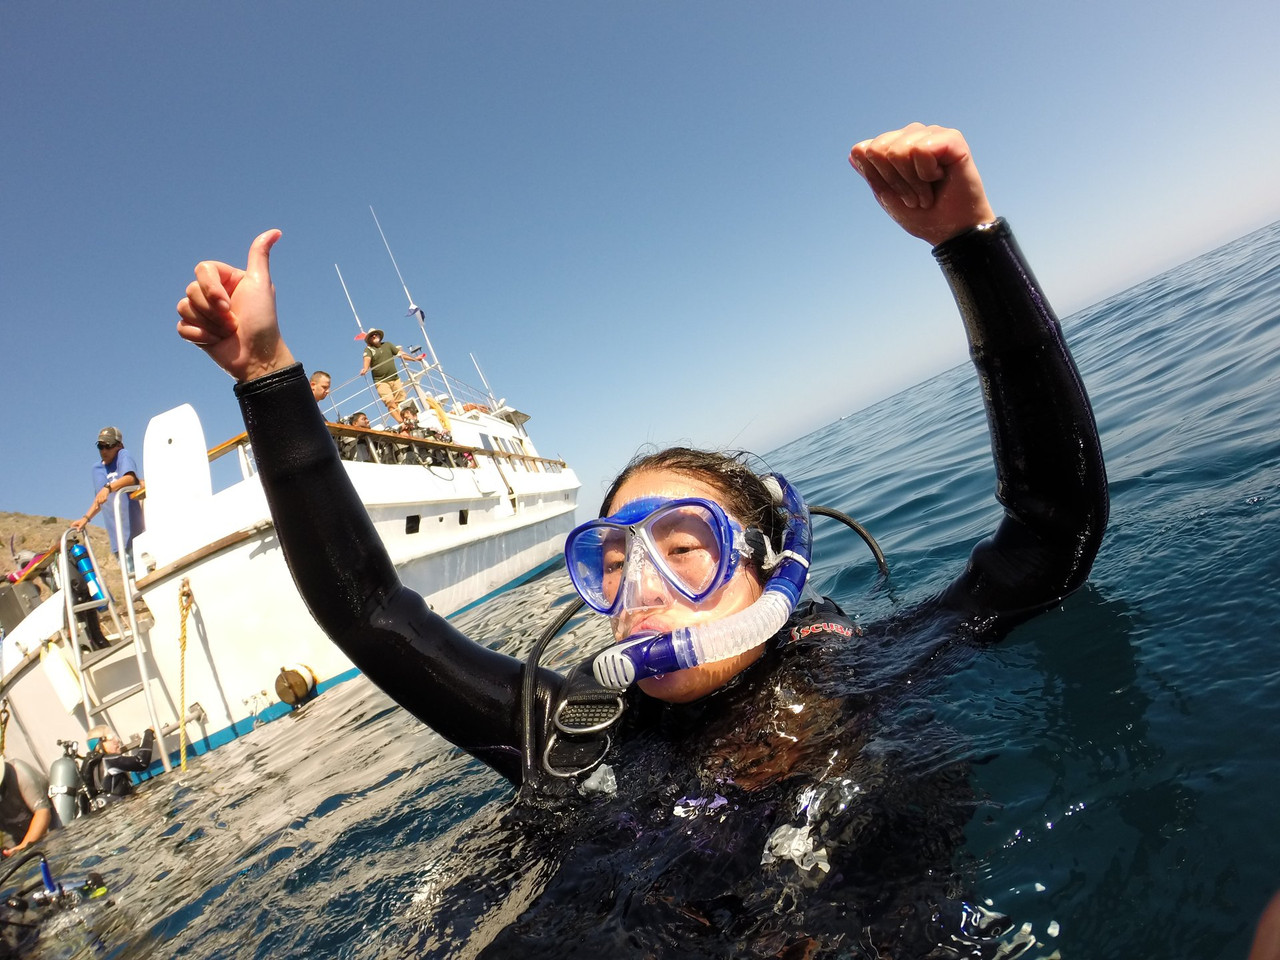 PADI Scuba Diver Certification - Done in One Weekend! Los